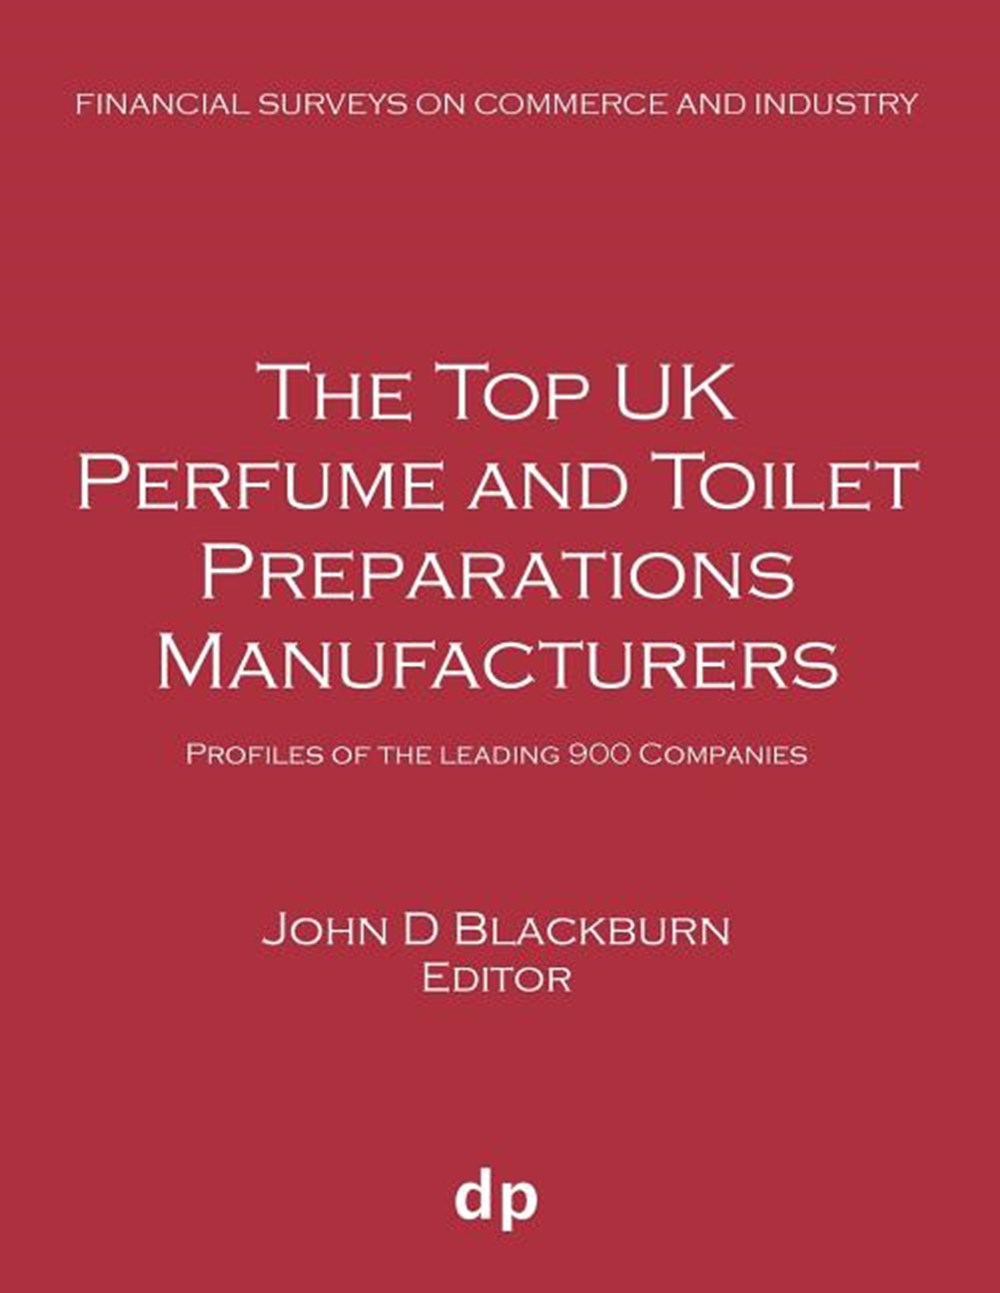 Top UK Perfume and Toilet Preparations Manufacturers: Profiles of the leading 900 companies (Summer 